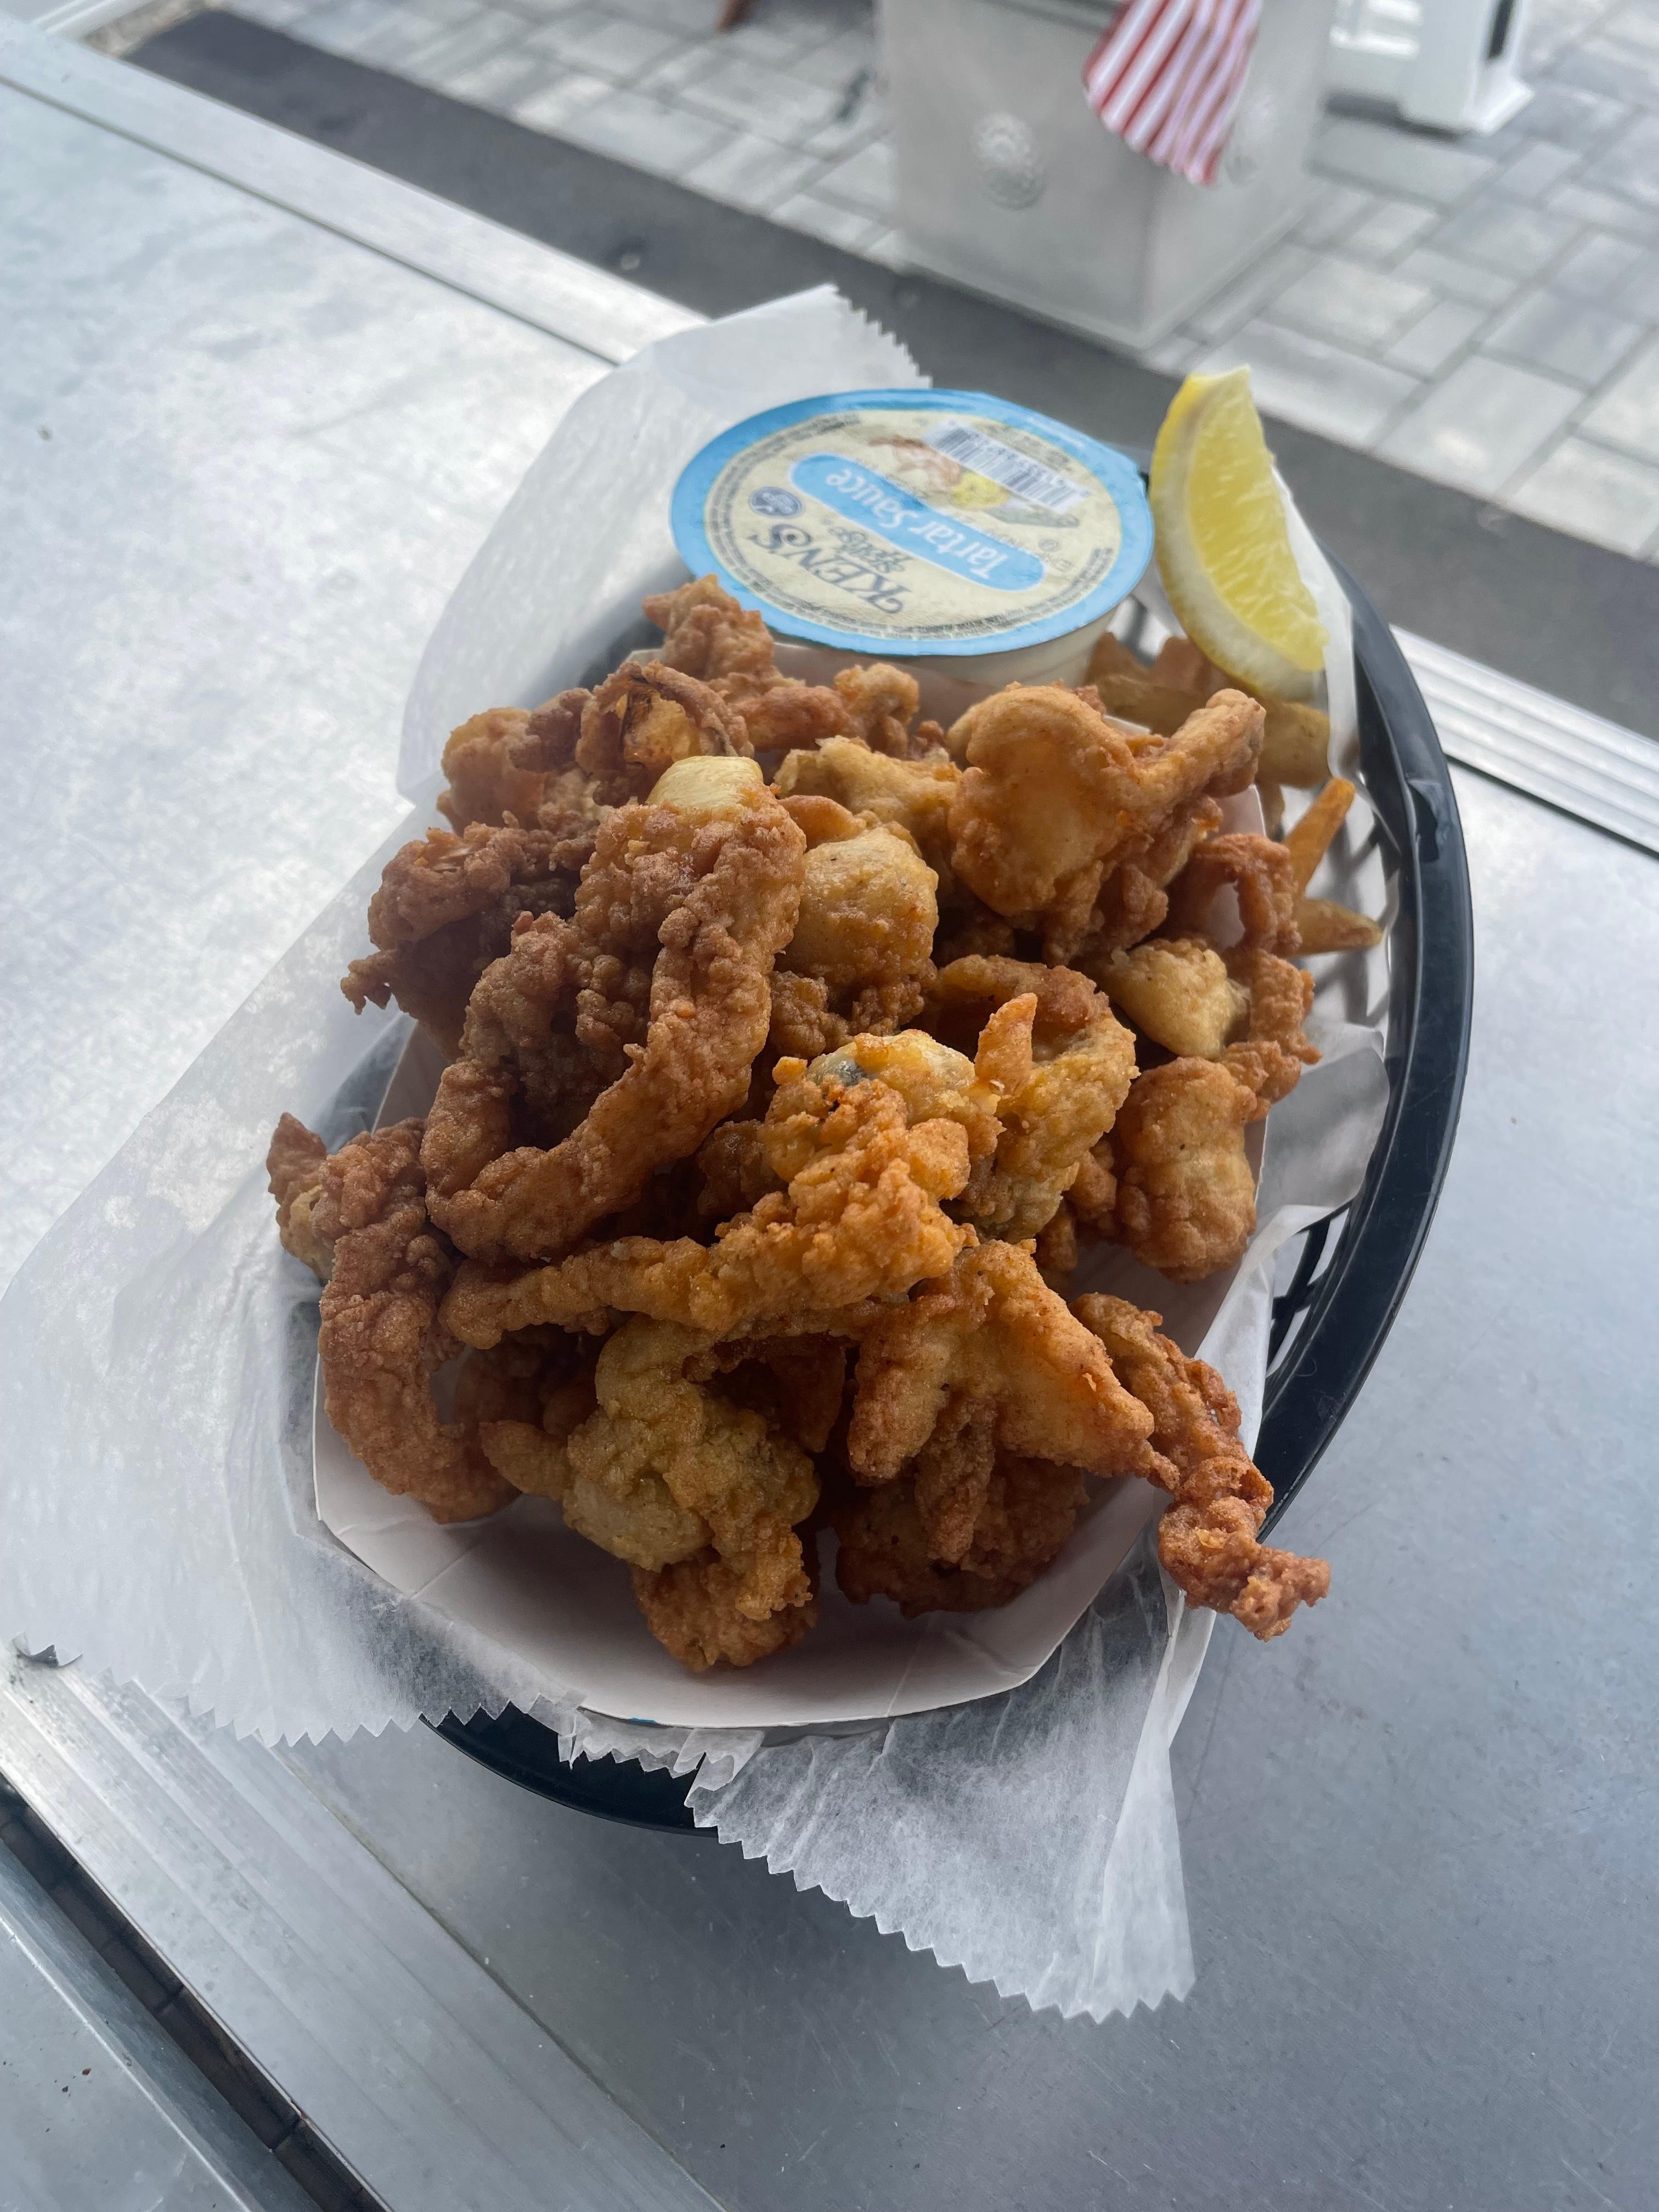 Local Fried Clam Plate